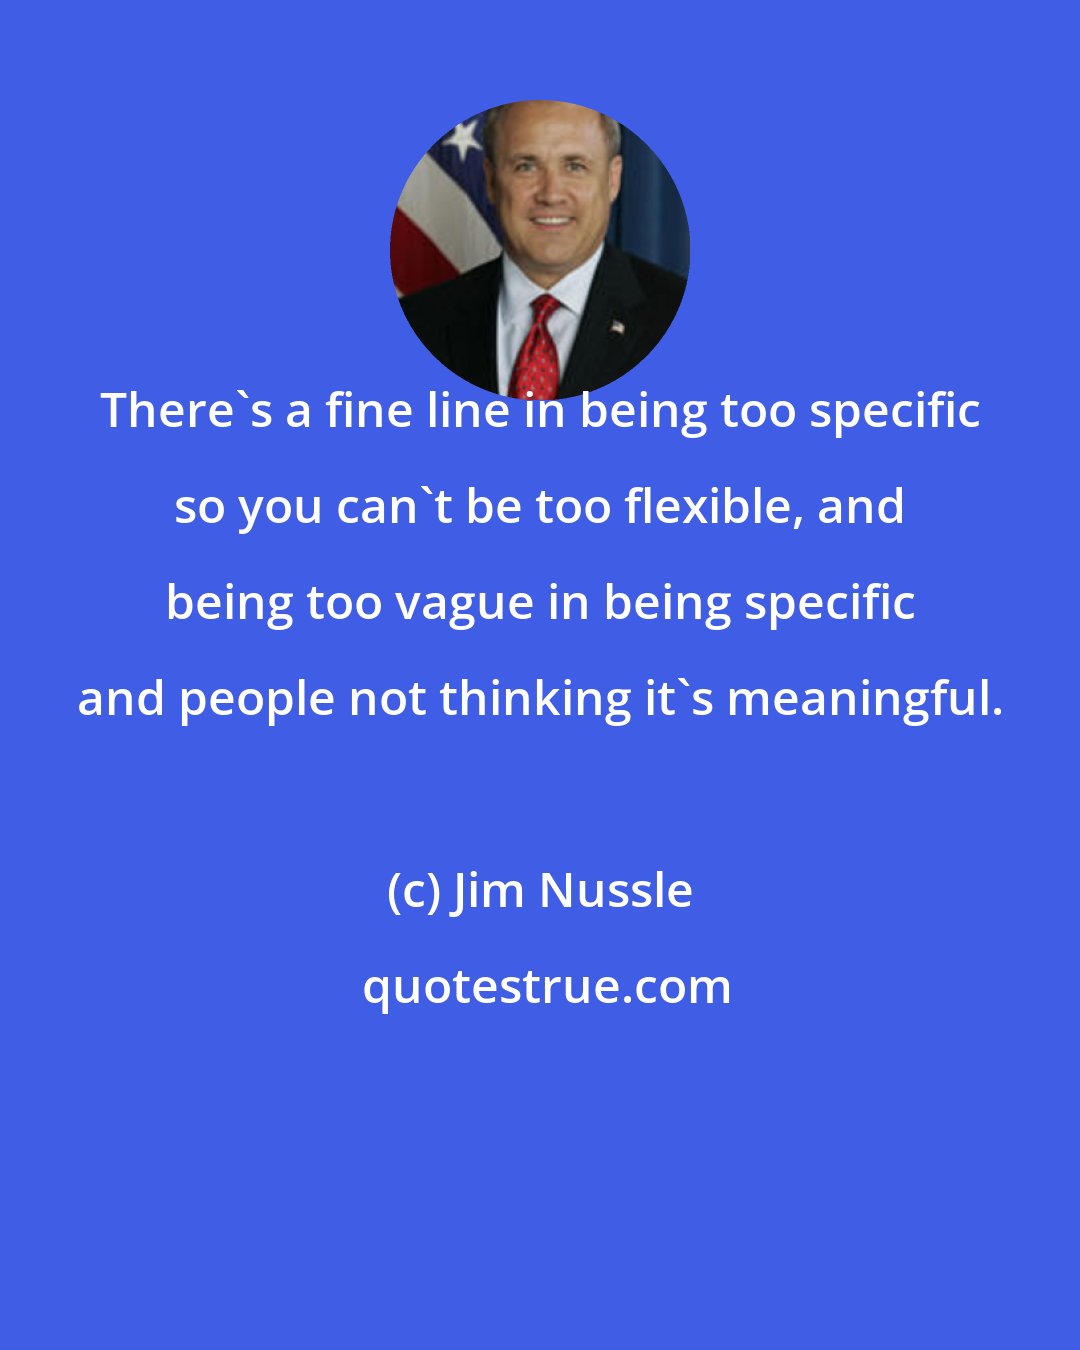 Jim Nussle: There's a fine line in being too specific so you can't be too flexible, and being too vague in being specific and people not thinking it's meaningful.